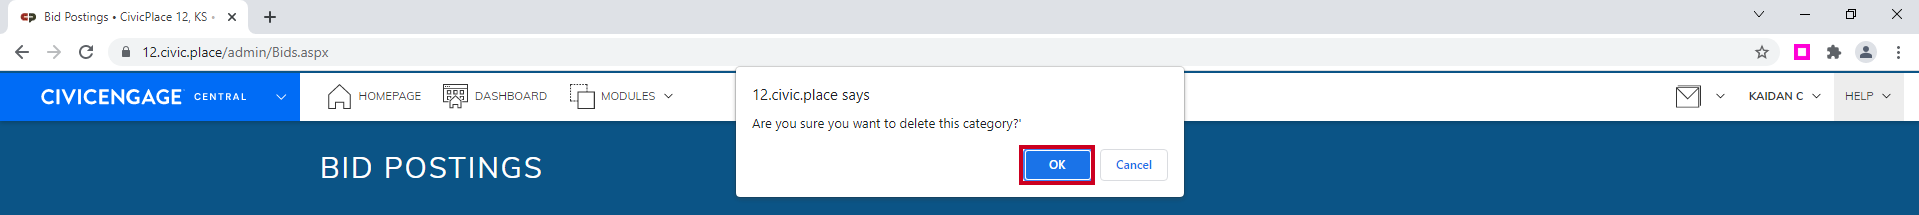 Pop-up window to confirm deletion